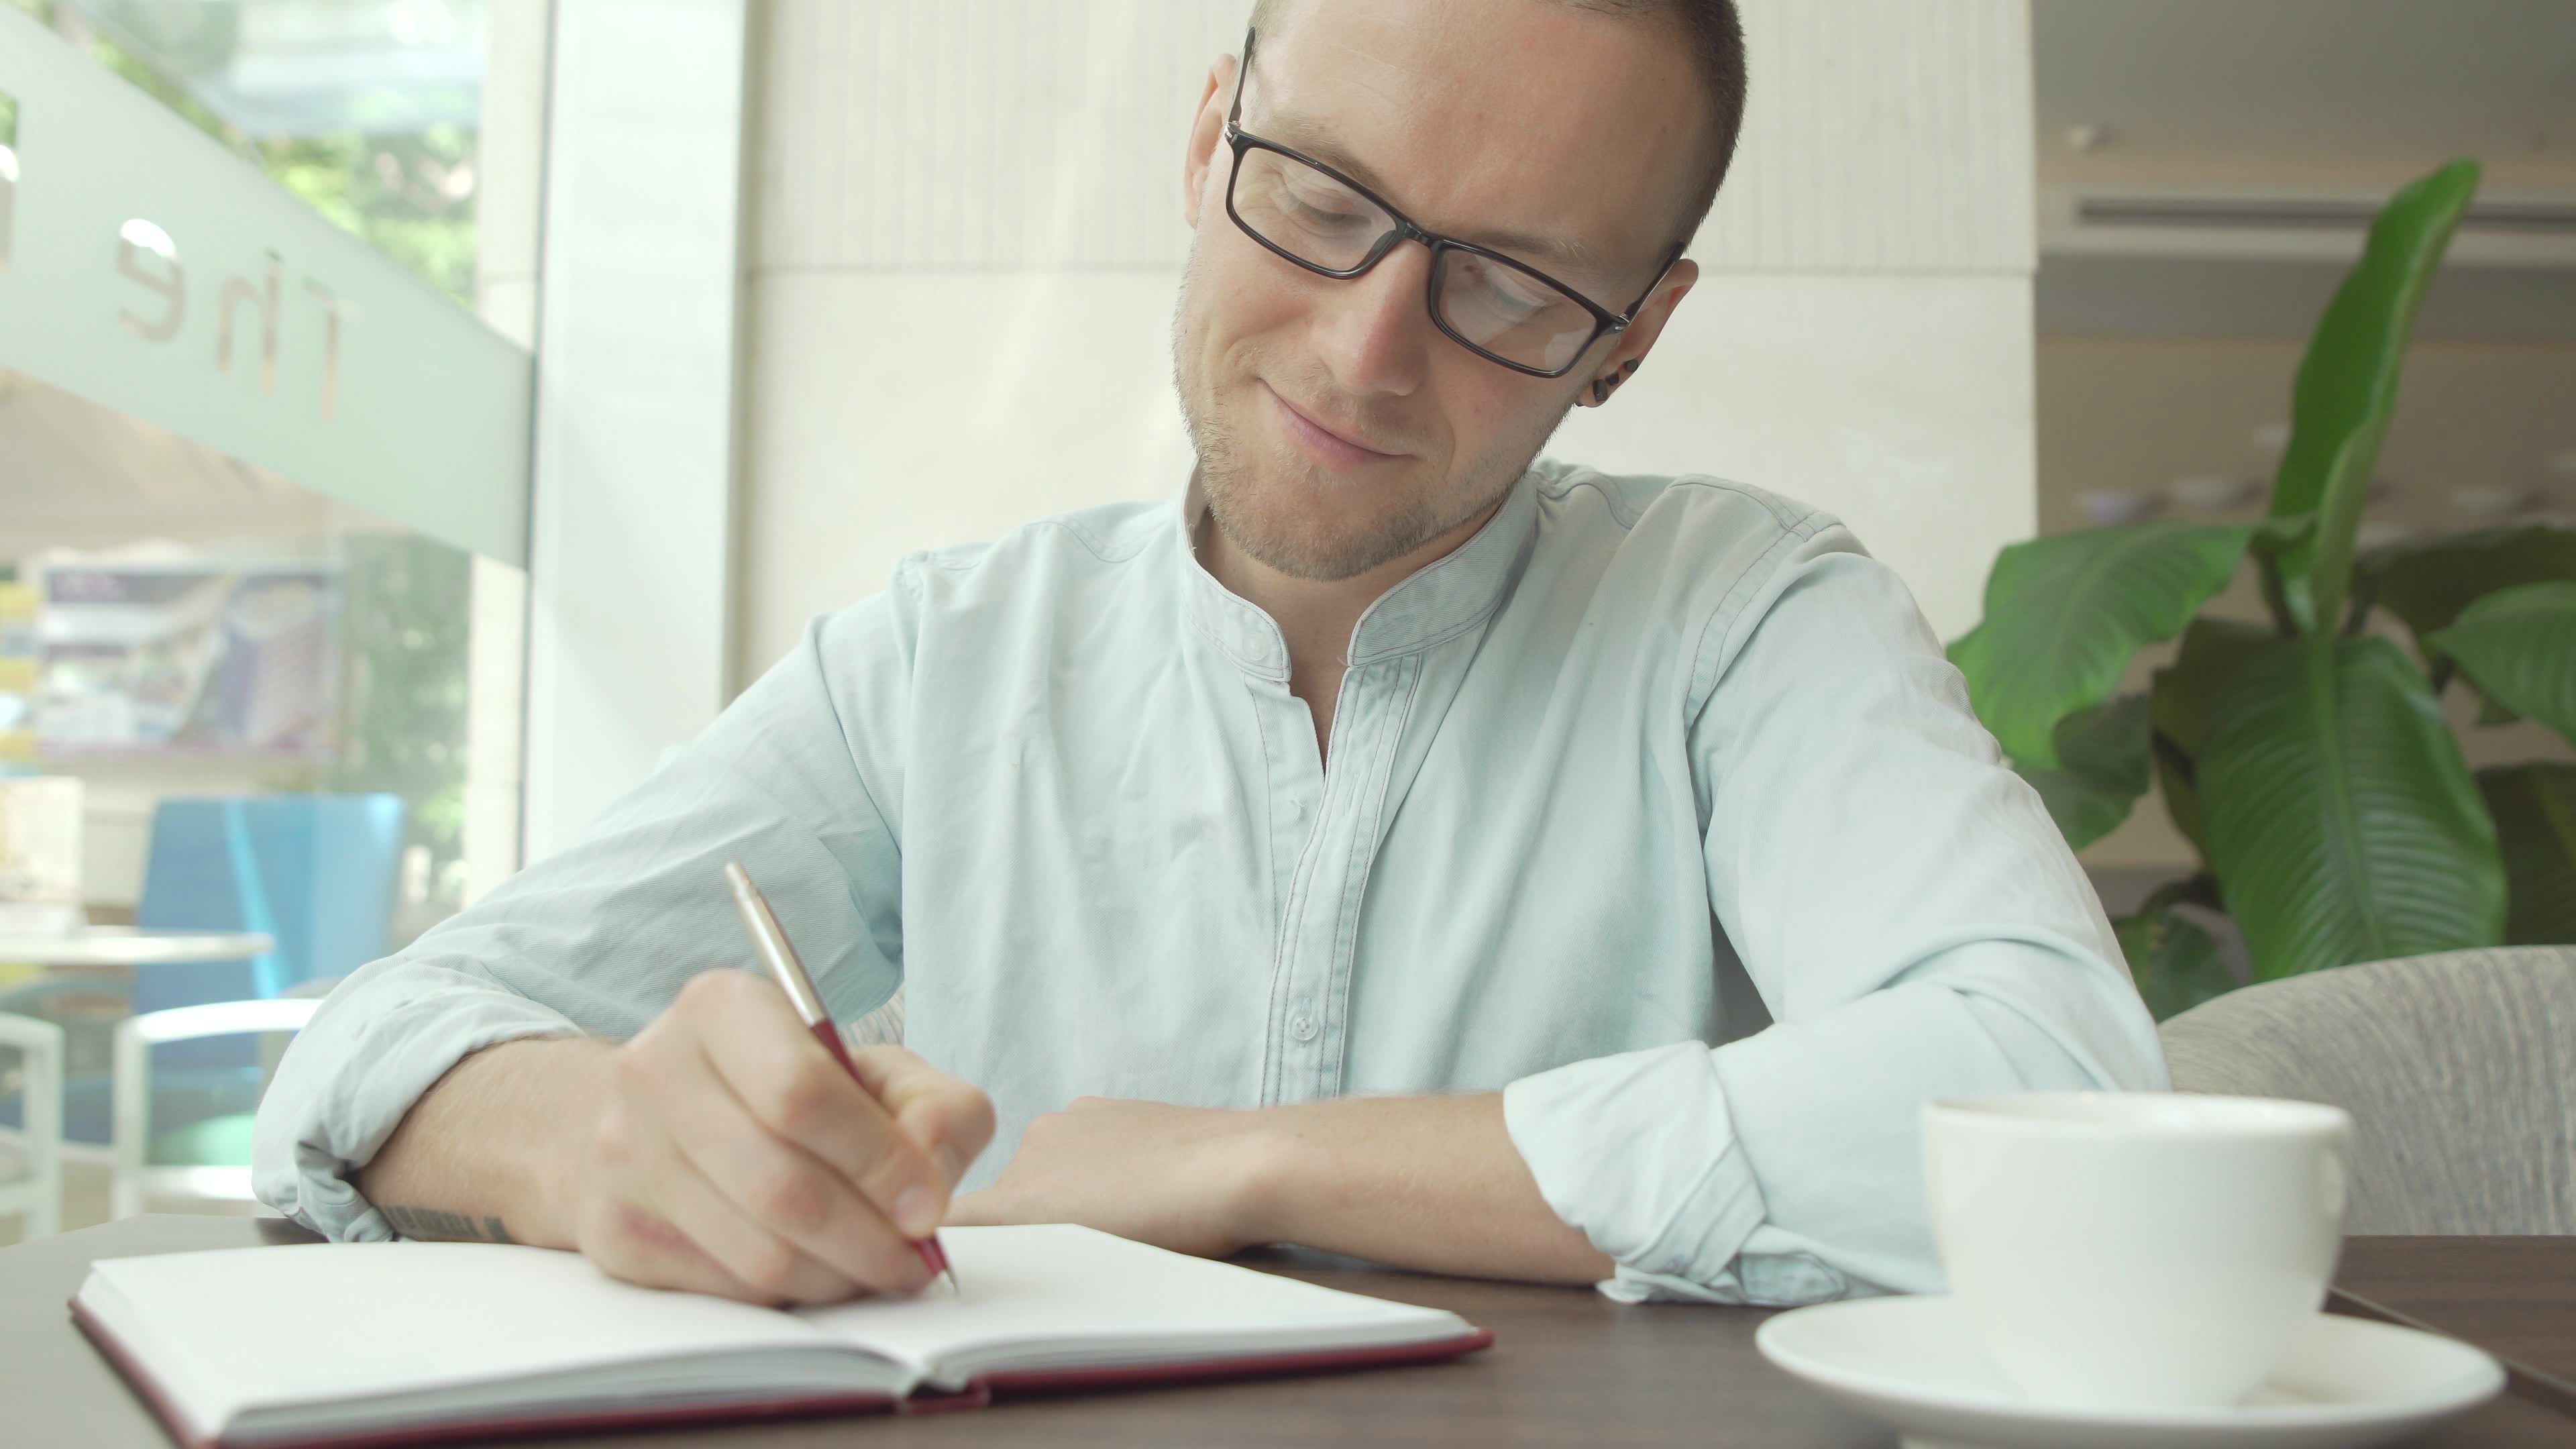 Young man with glasses making notes in a journal while he drinks coffee